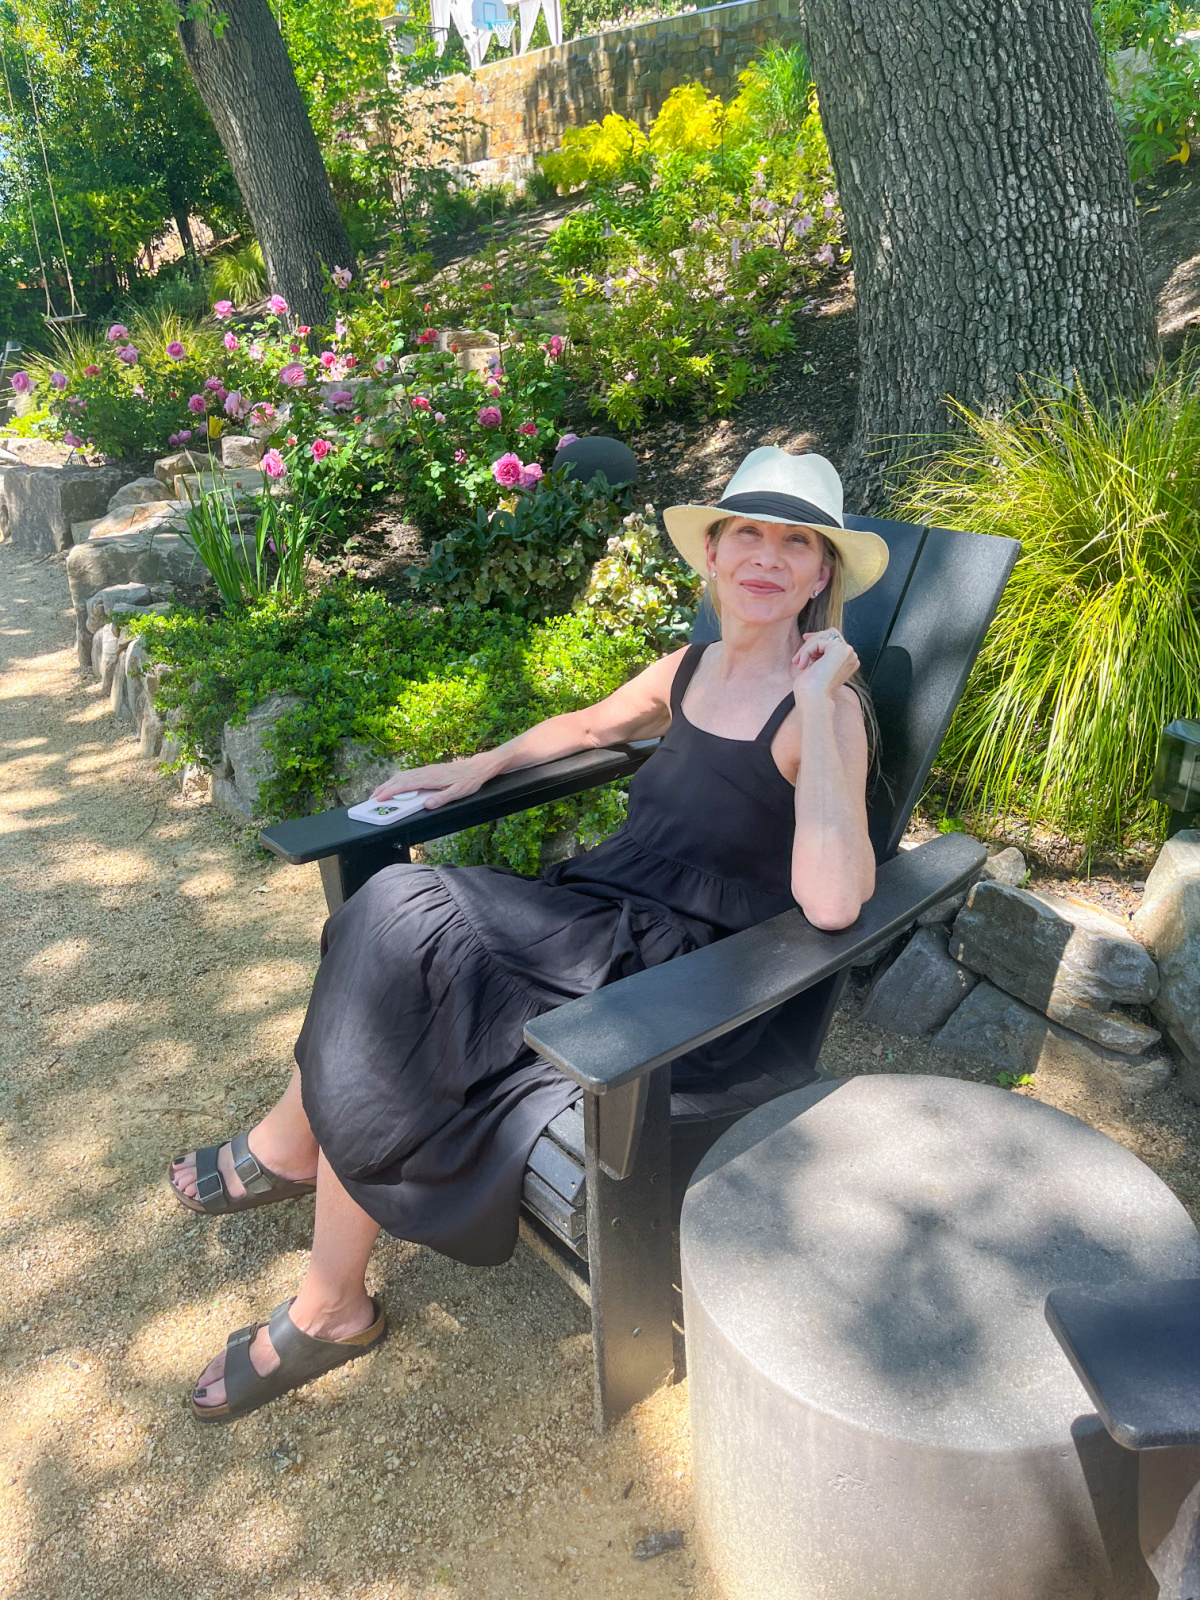 Woman wearing black dress and hat sitting in Adirondack chair in summer garden.